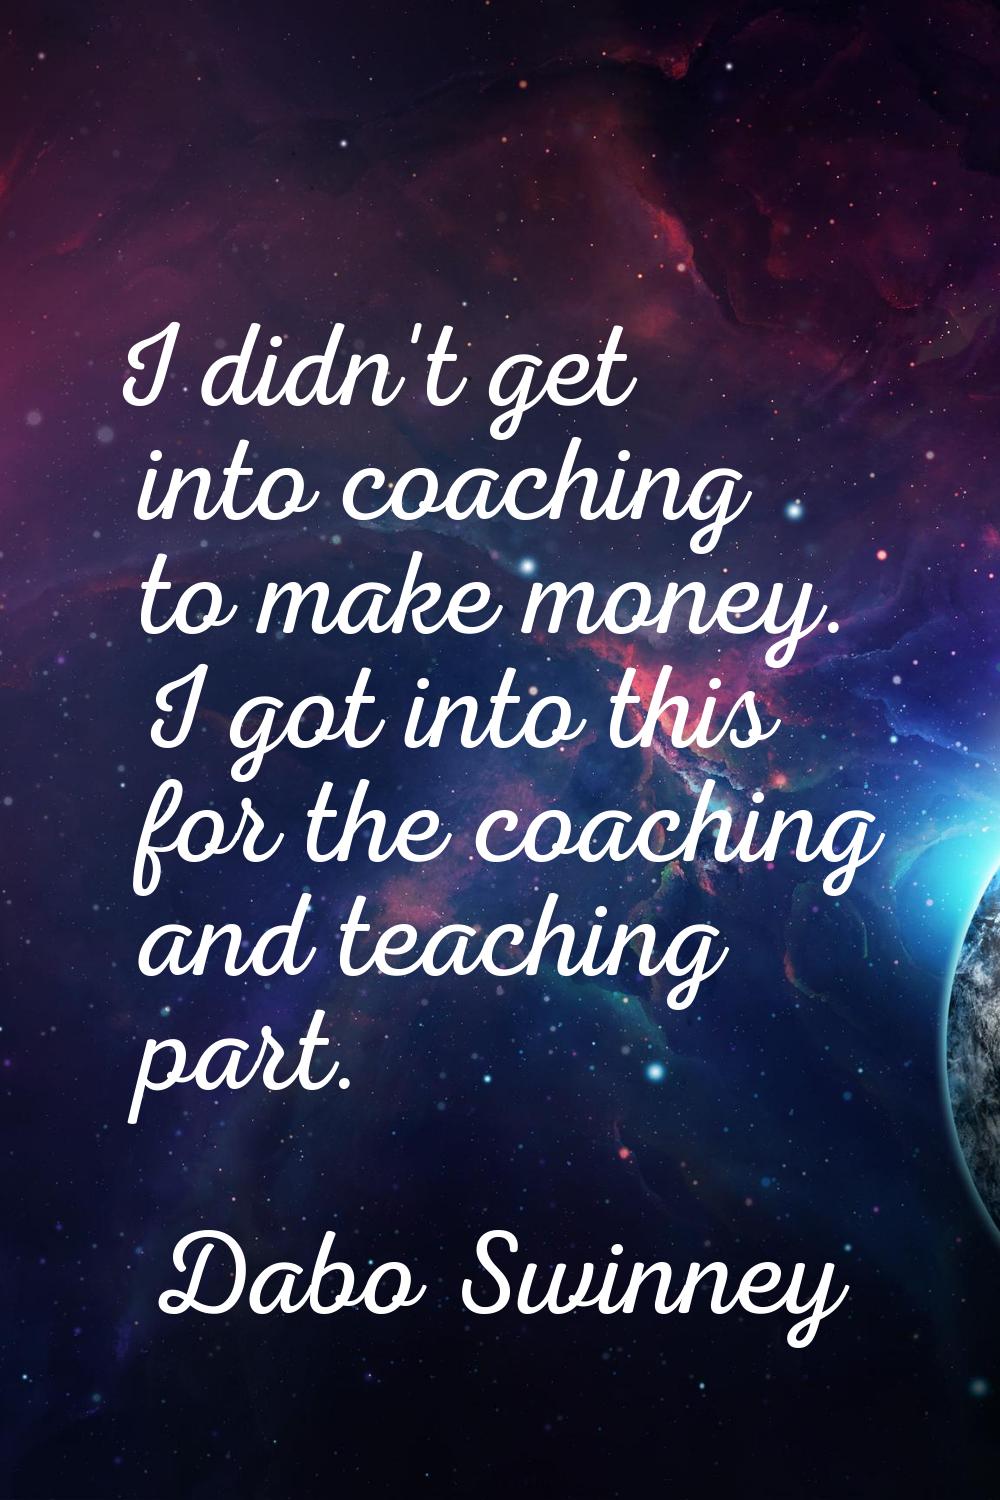 I didn't get into coaching to make money. I got into this for the coaching and teaching part.